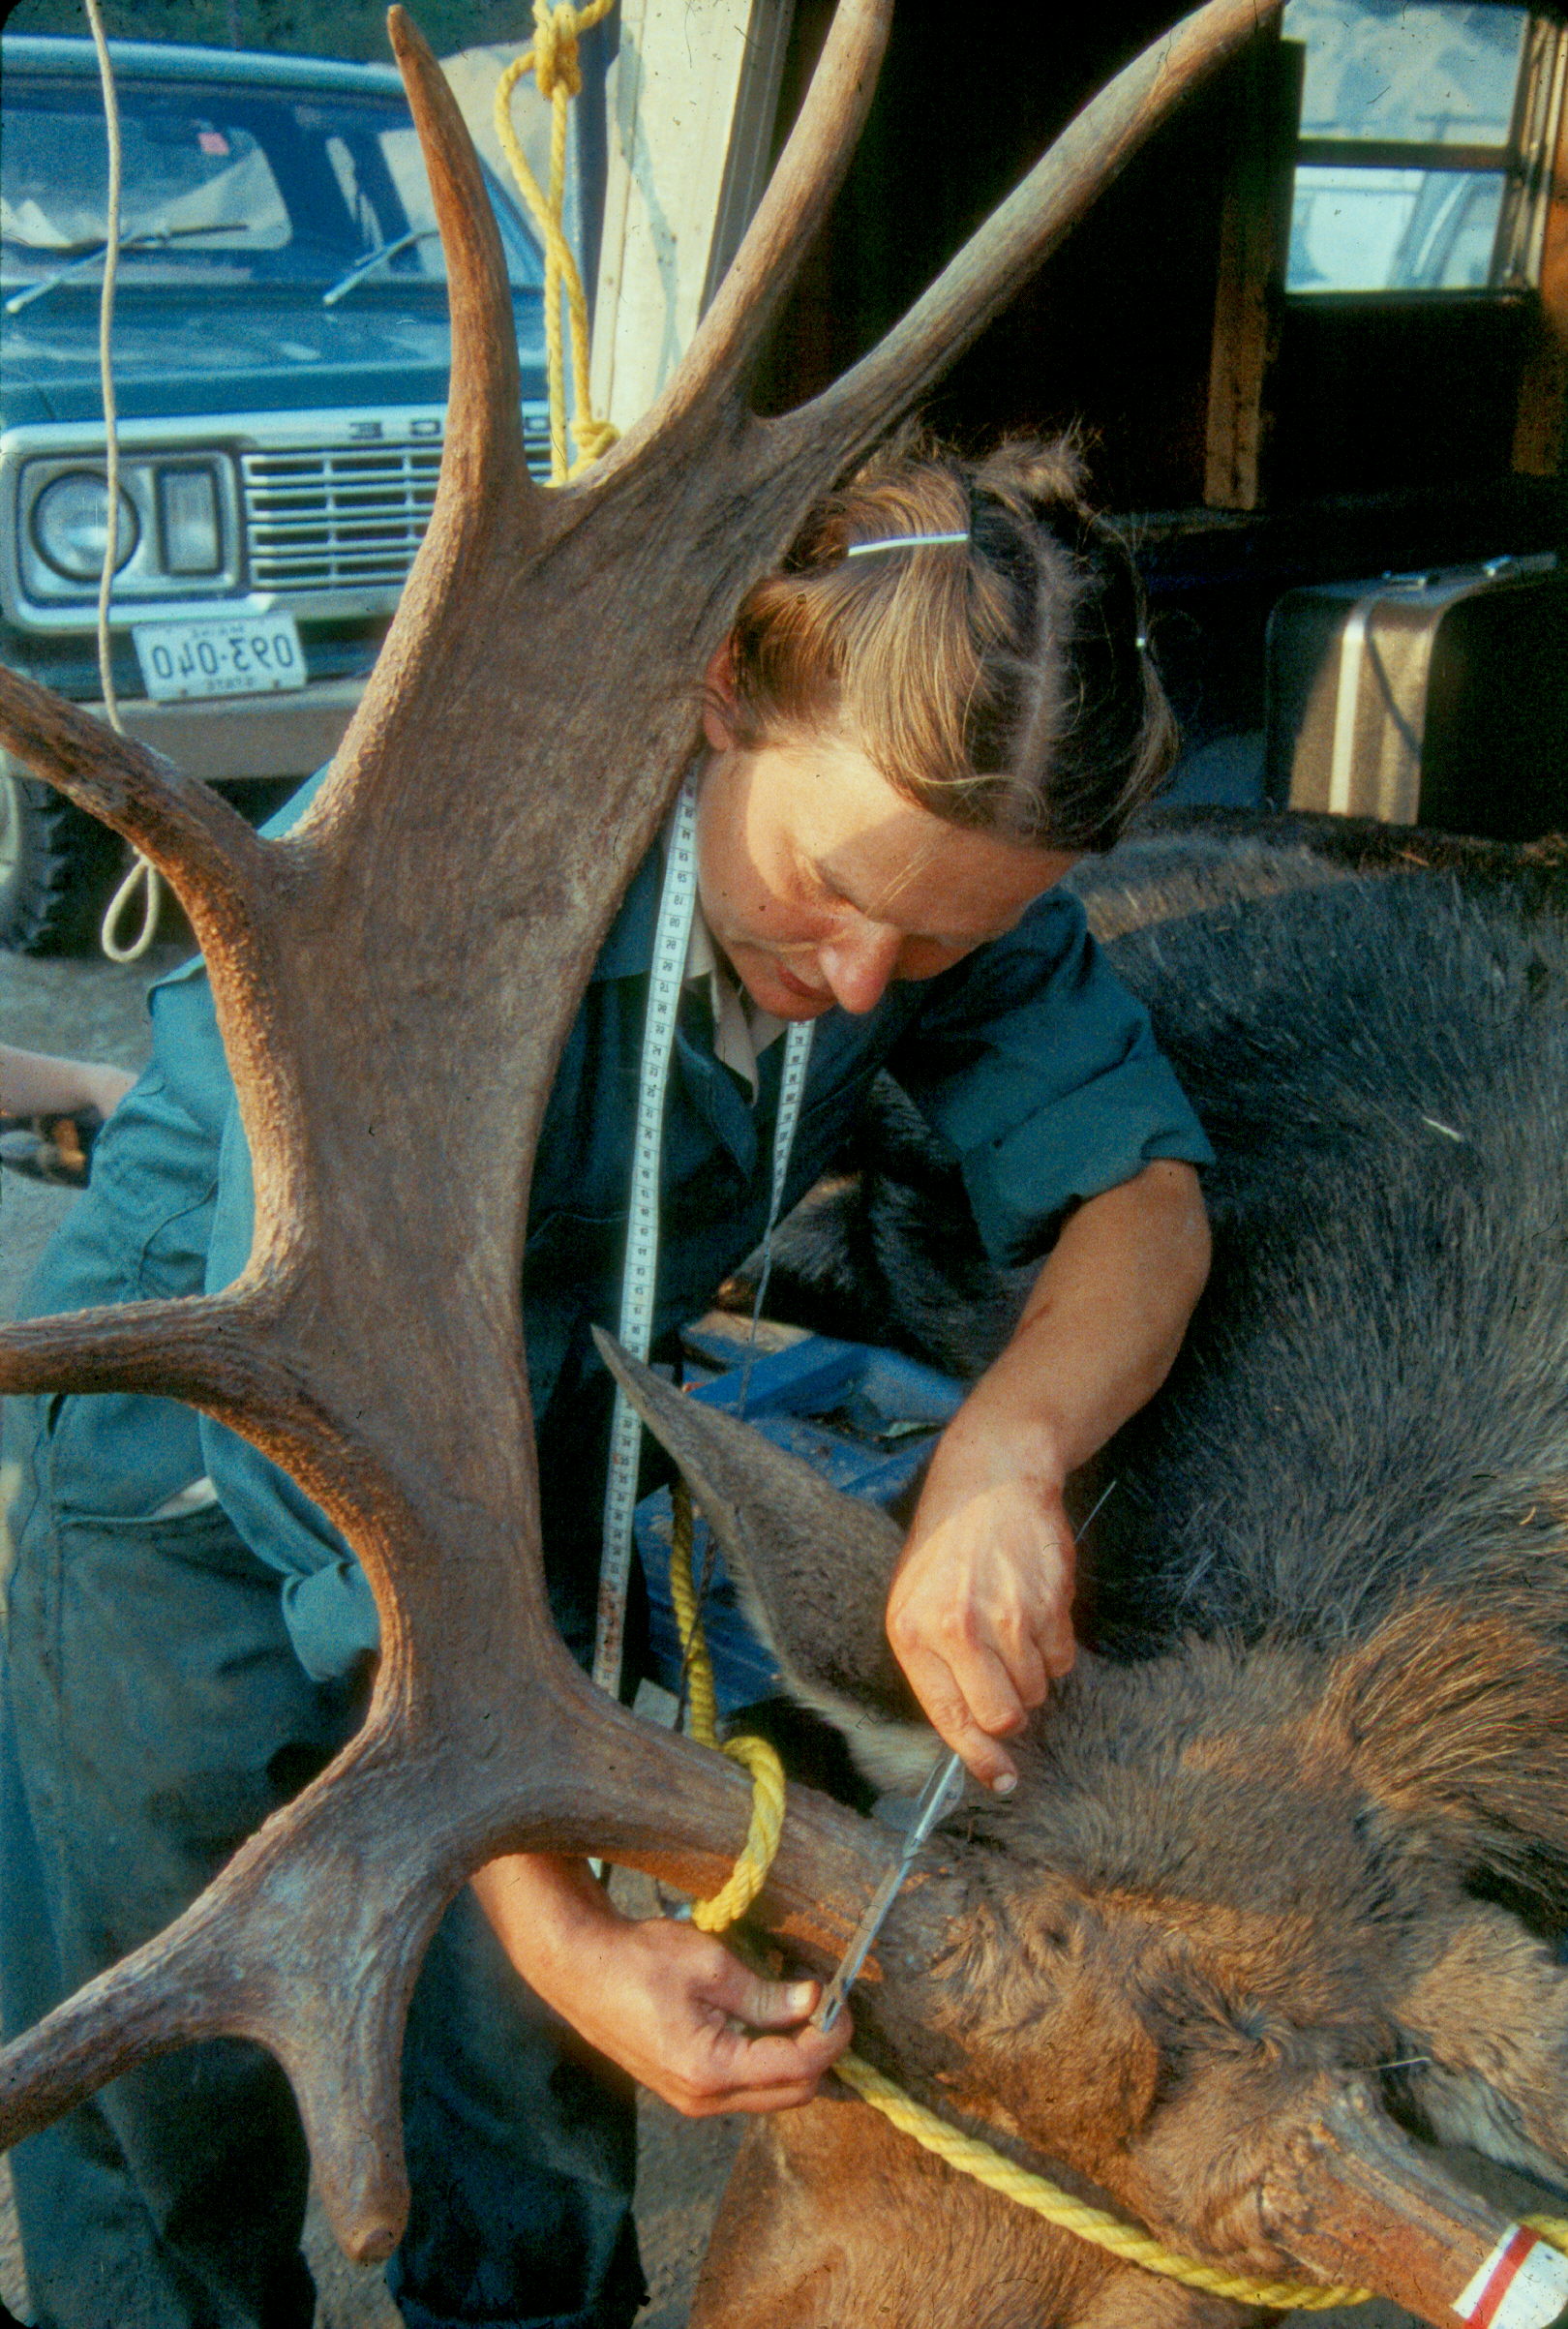 MDIFW's first female biologist measuring moose antlers